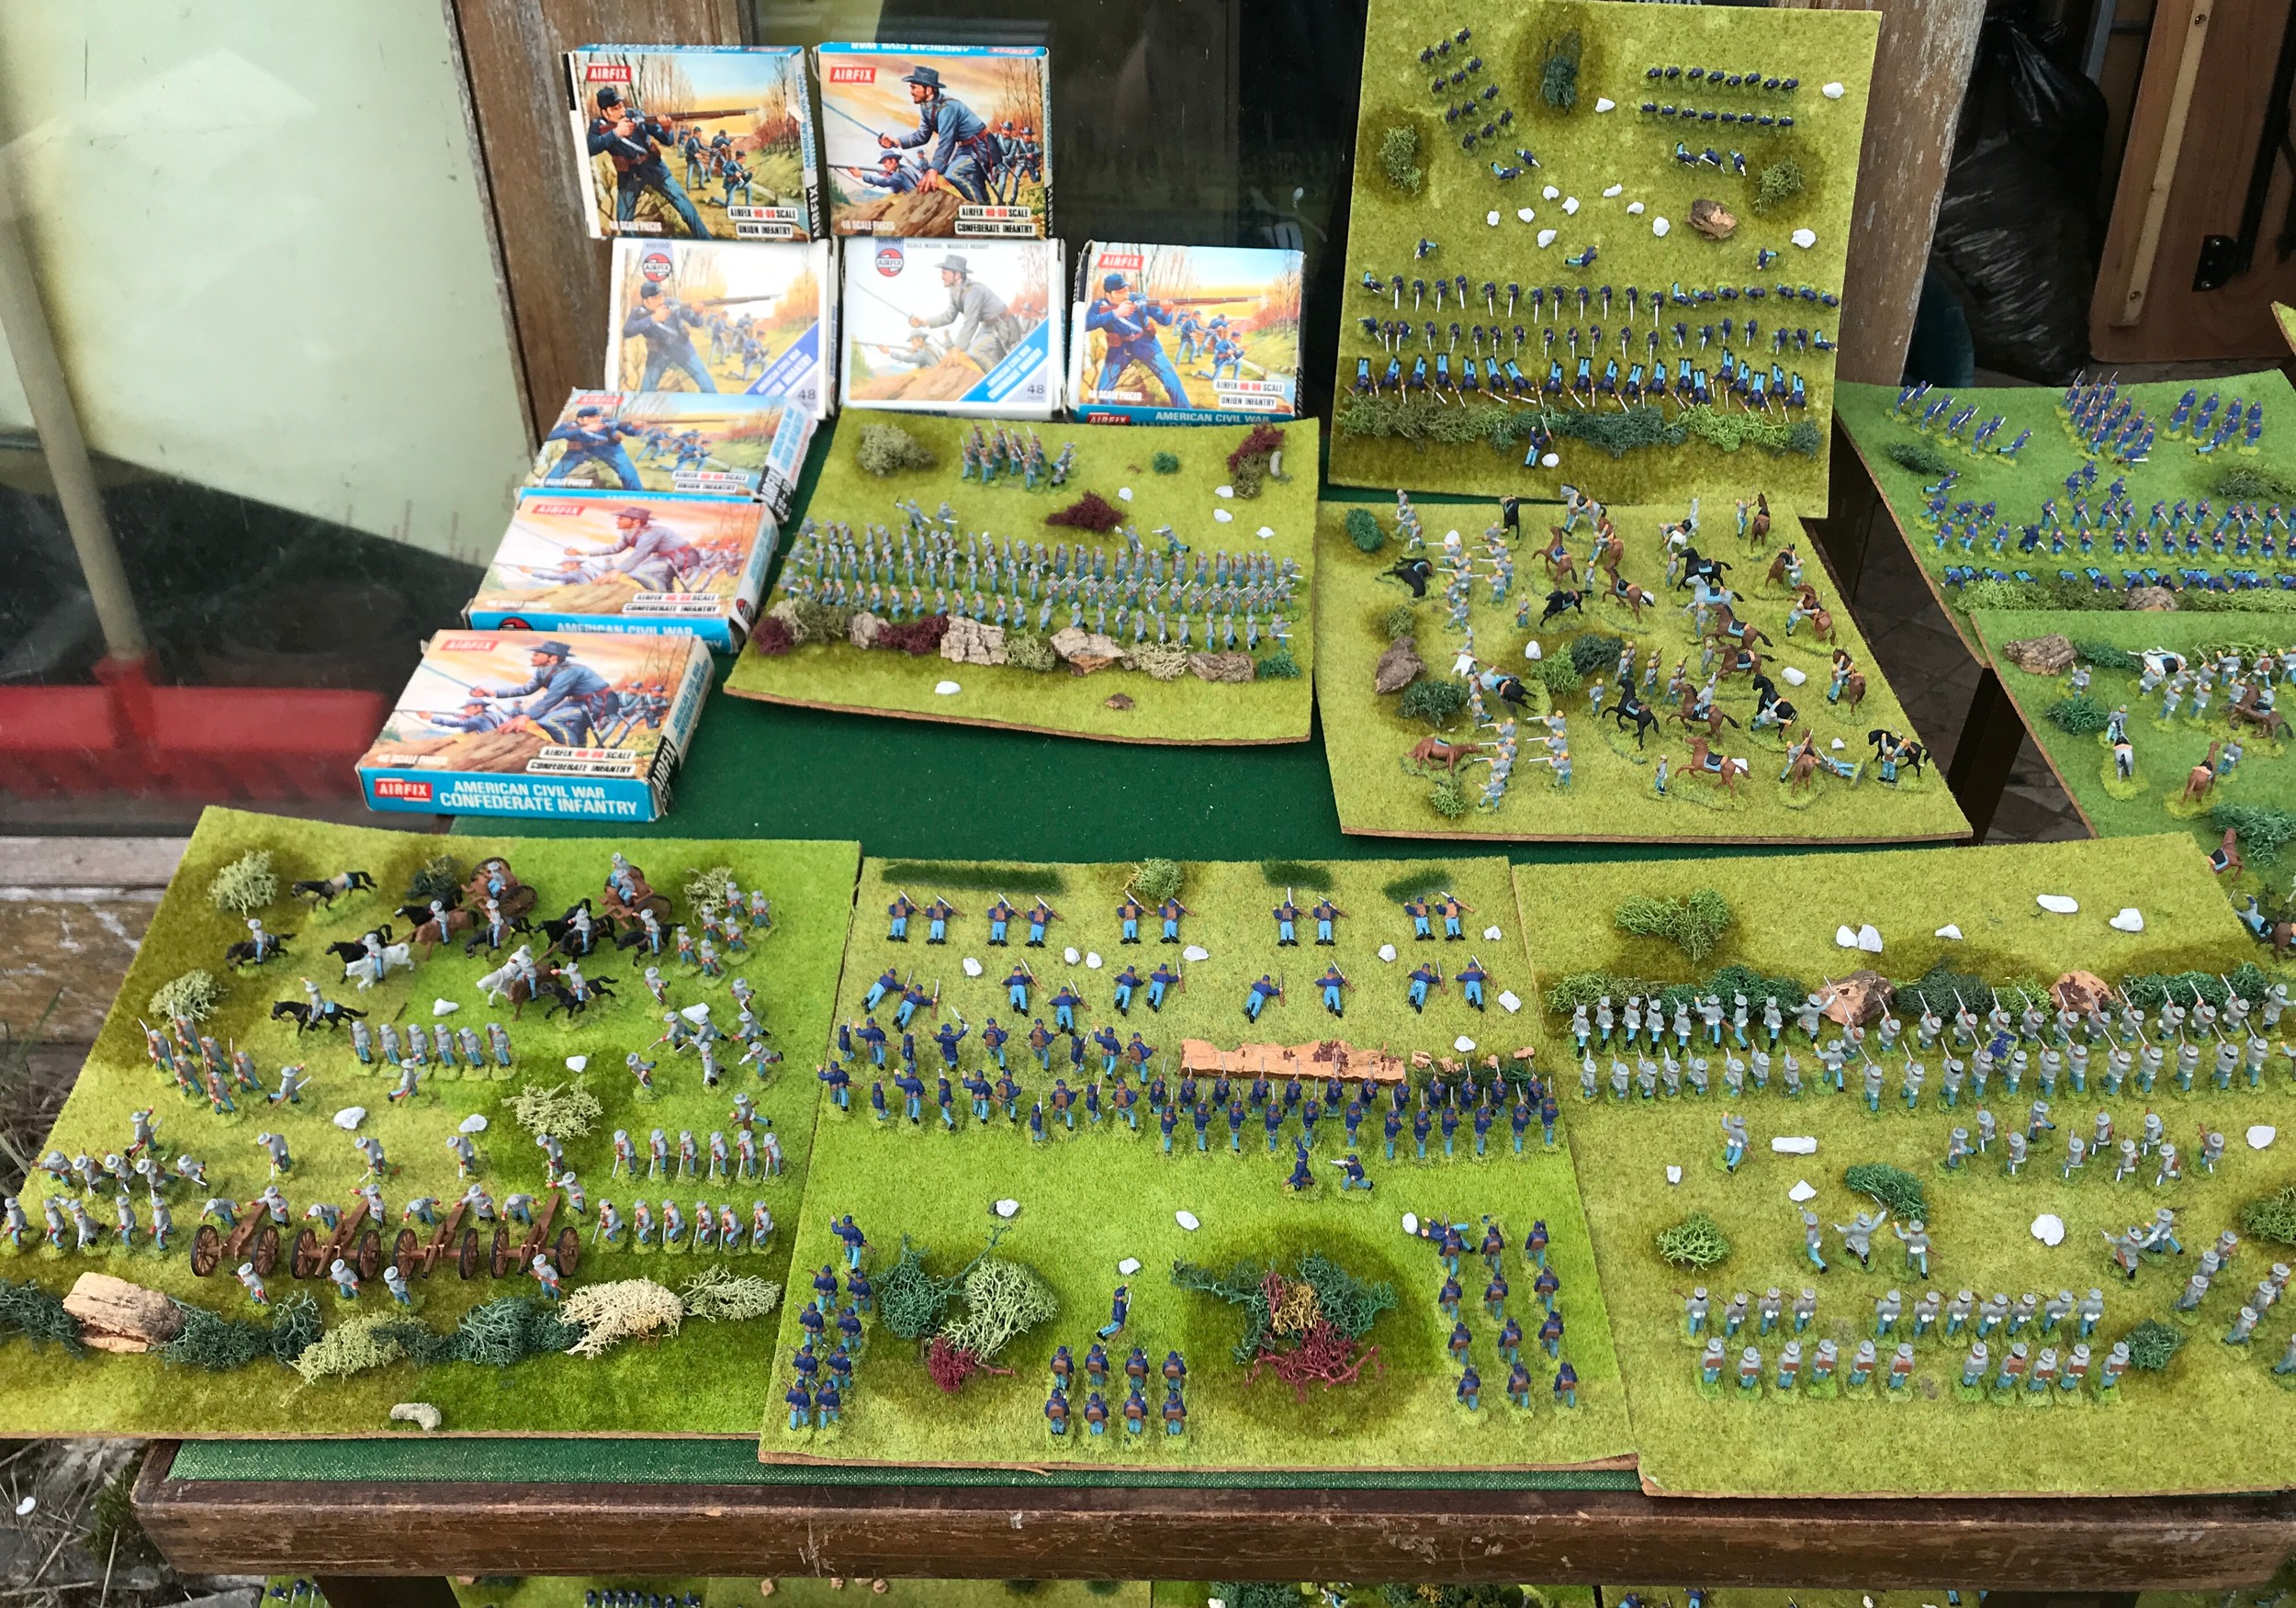 A large collection of American Civil war miniatures believed to be produced by Airfix displayed on - Image 2 of 5